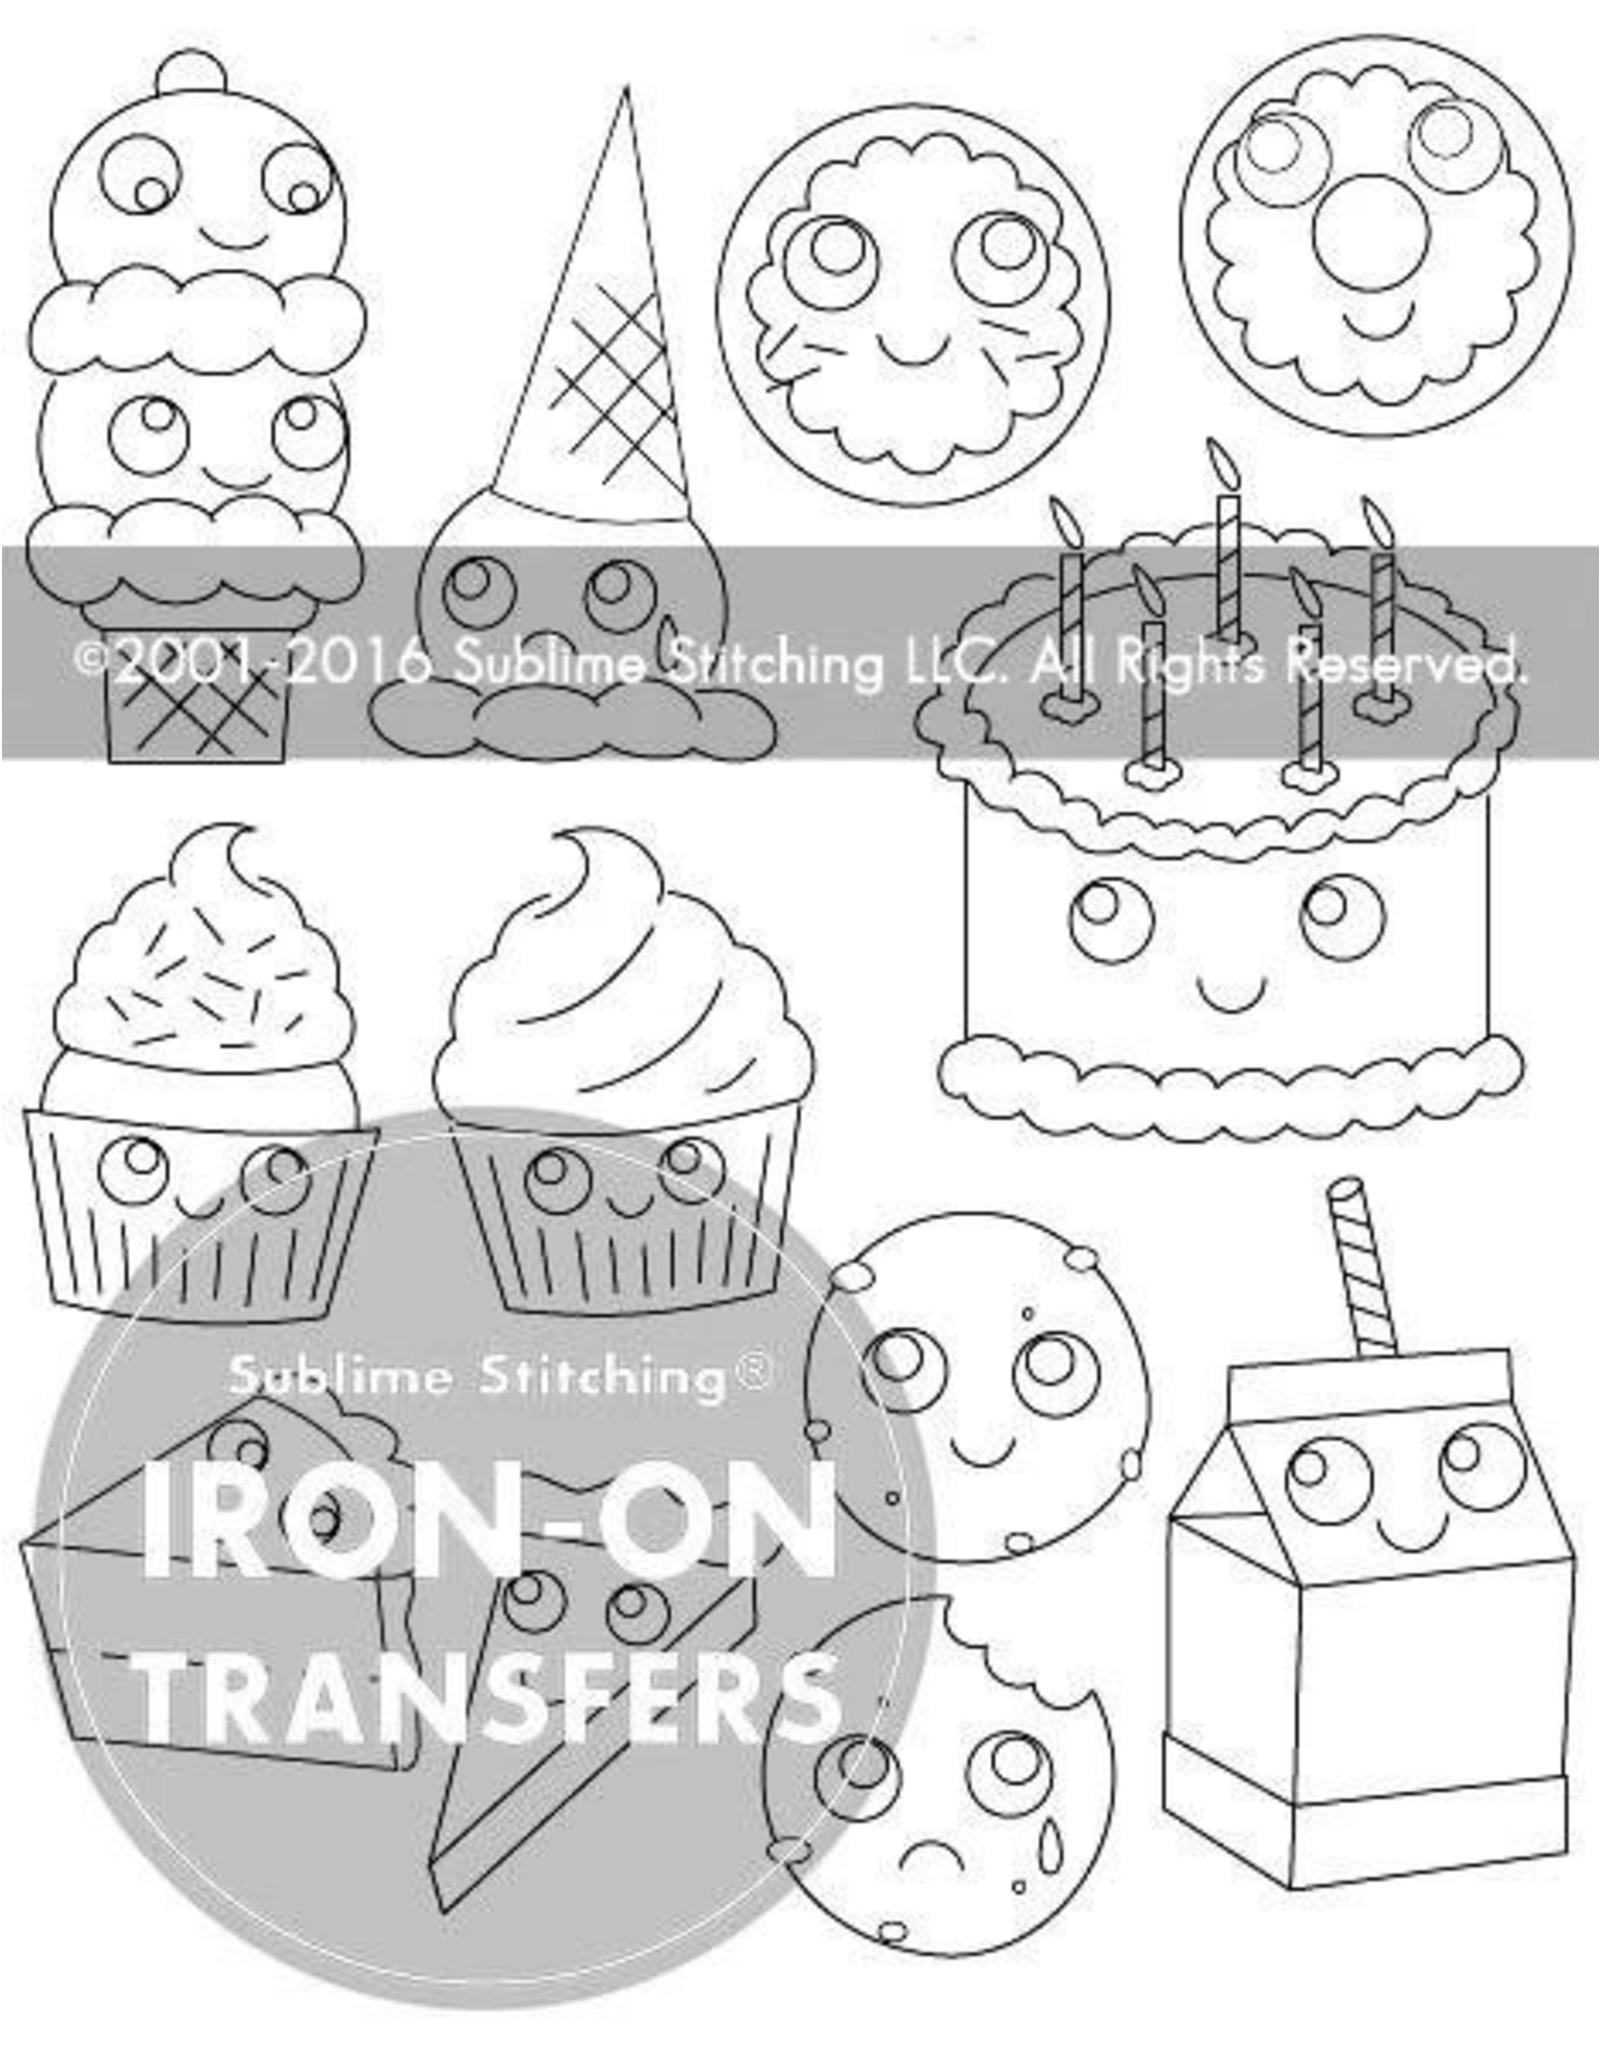 Sublime Stitching Embroidery Iron-On Transfers, Sweet Treats